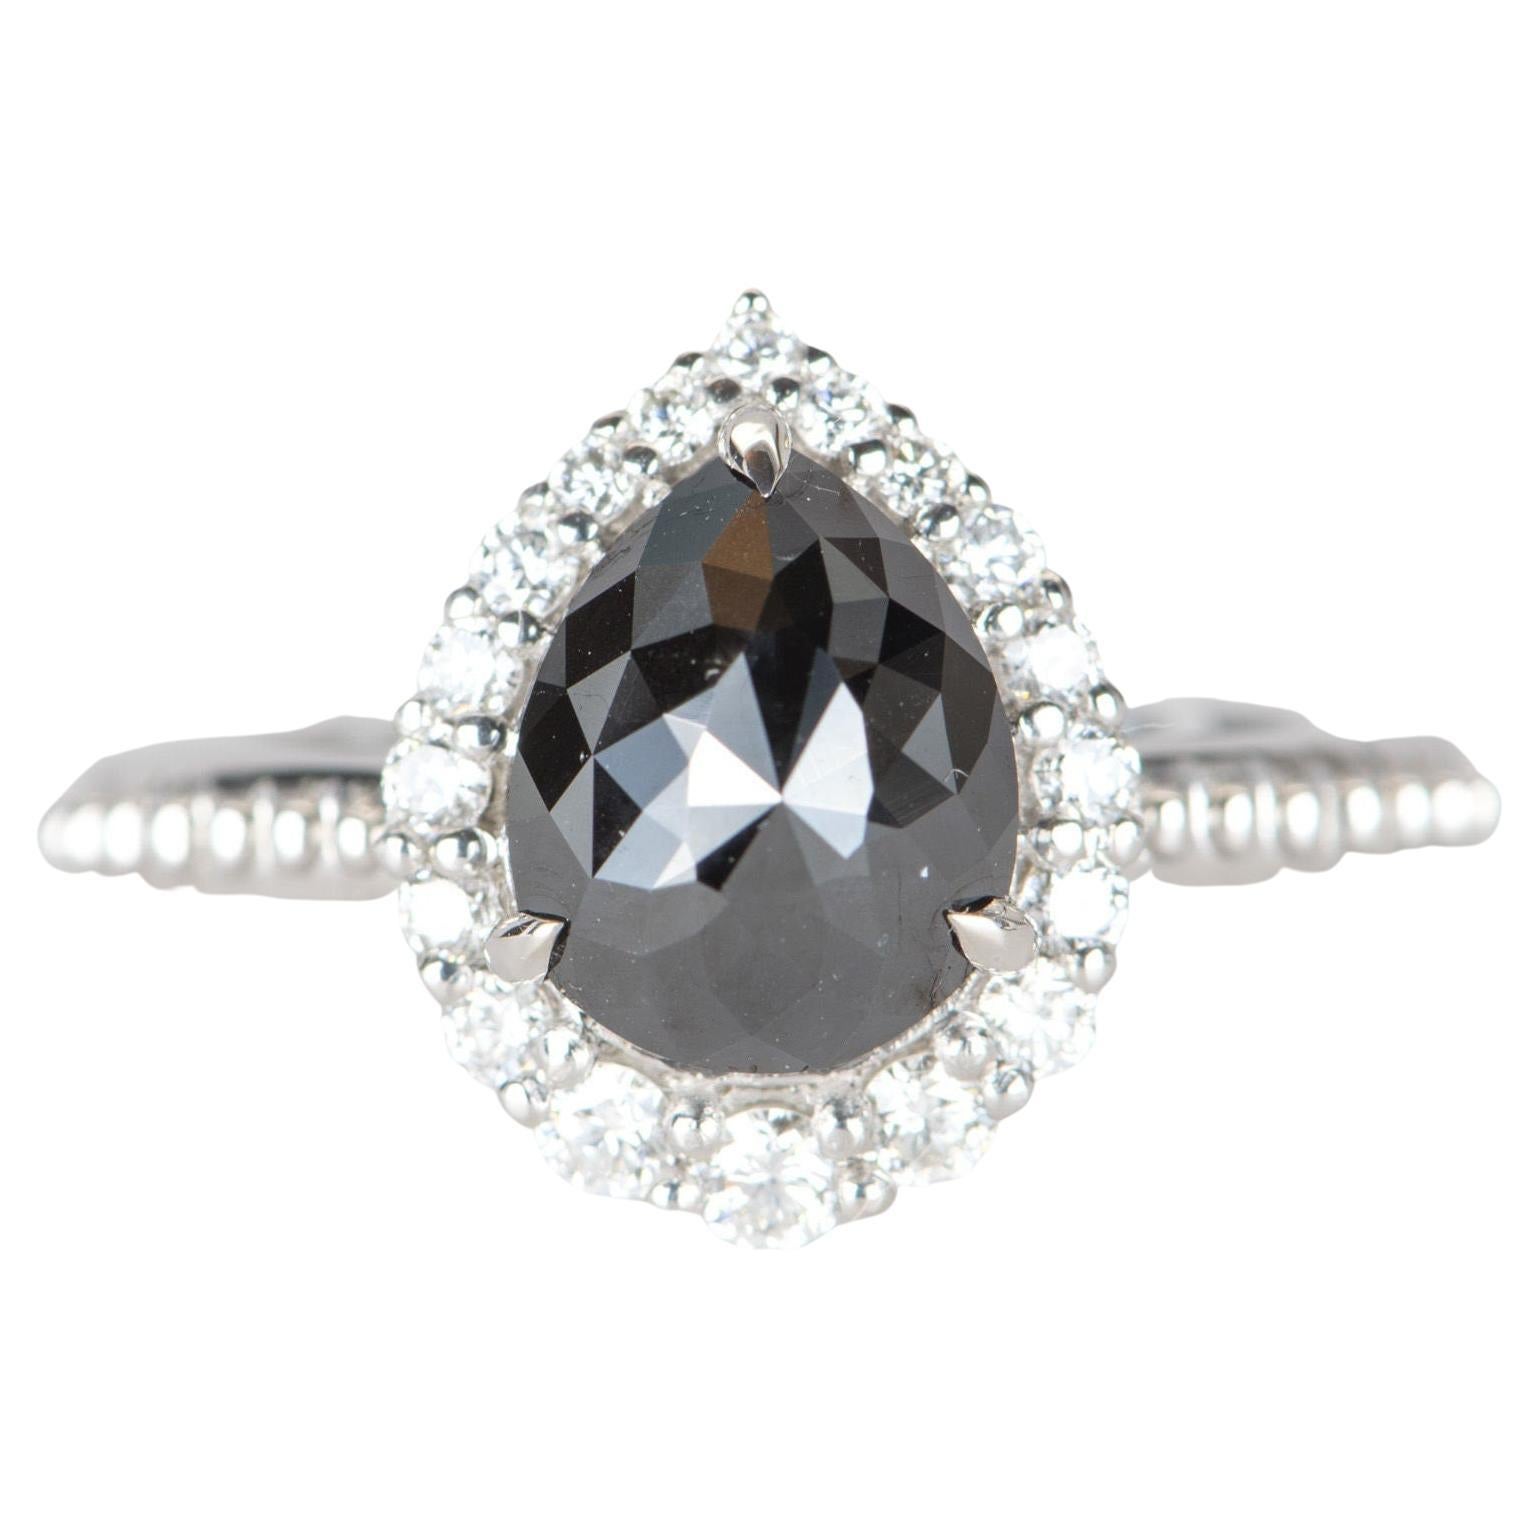 1.74ct Black Diamond with Clear Halo 14K White Gold Engagement Ring R6306 For Sale